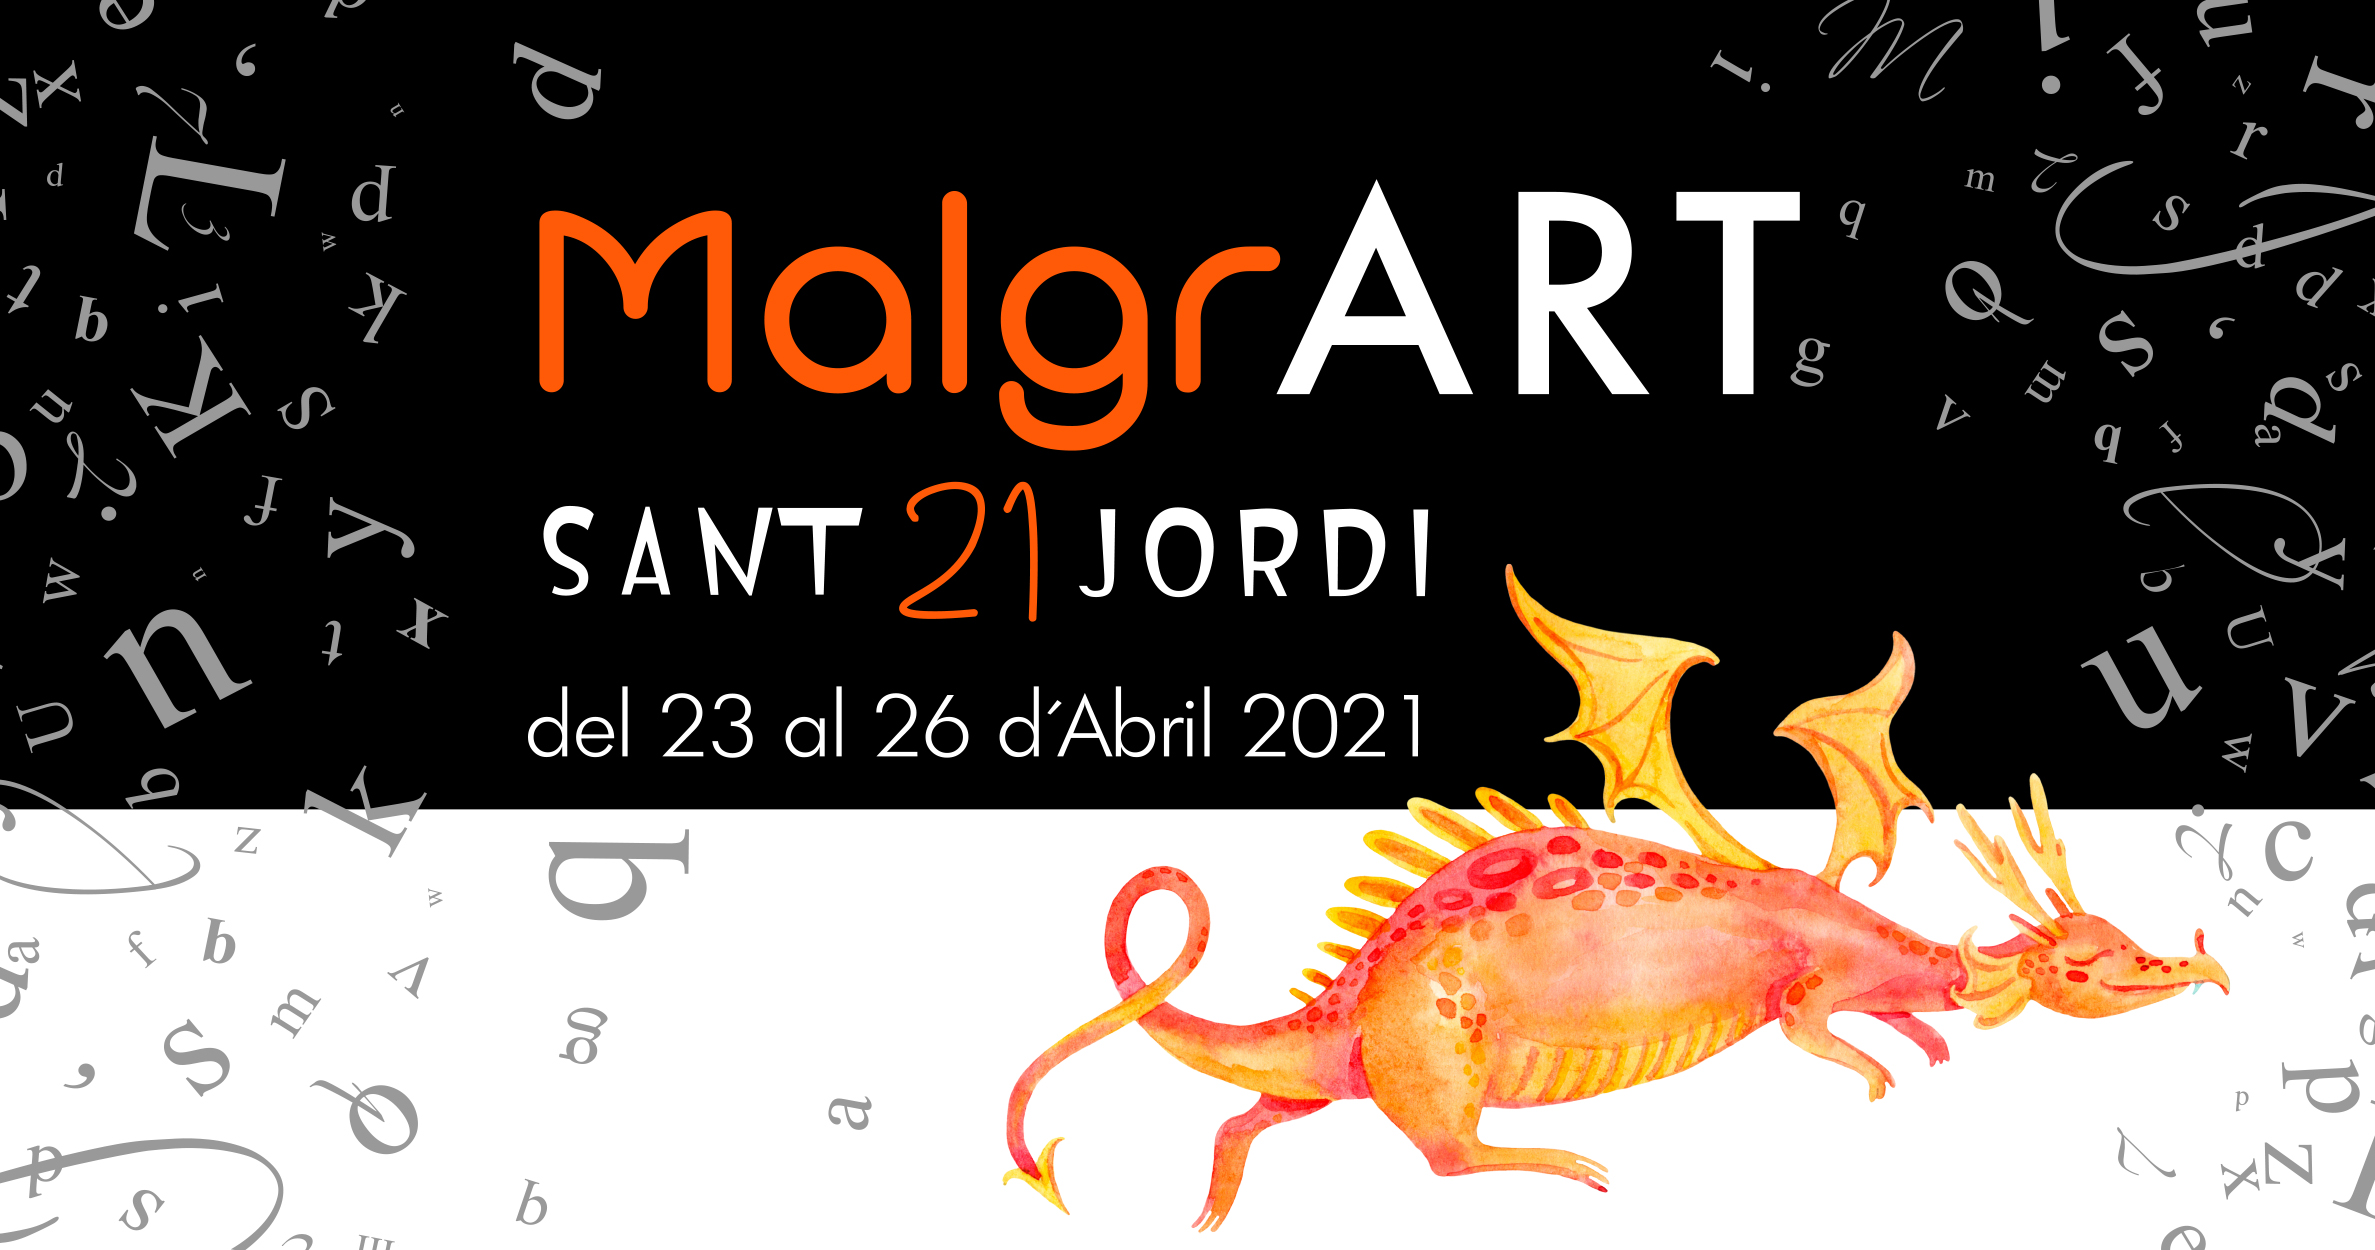 MalgrART 2021: Cant Coral